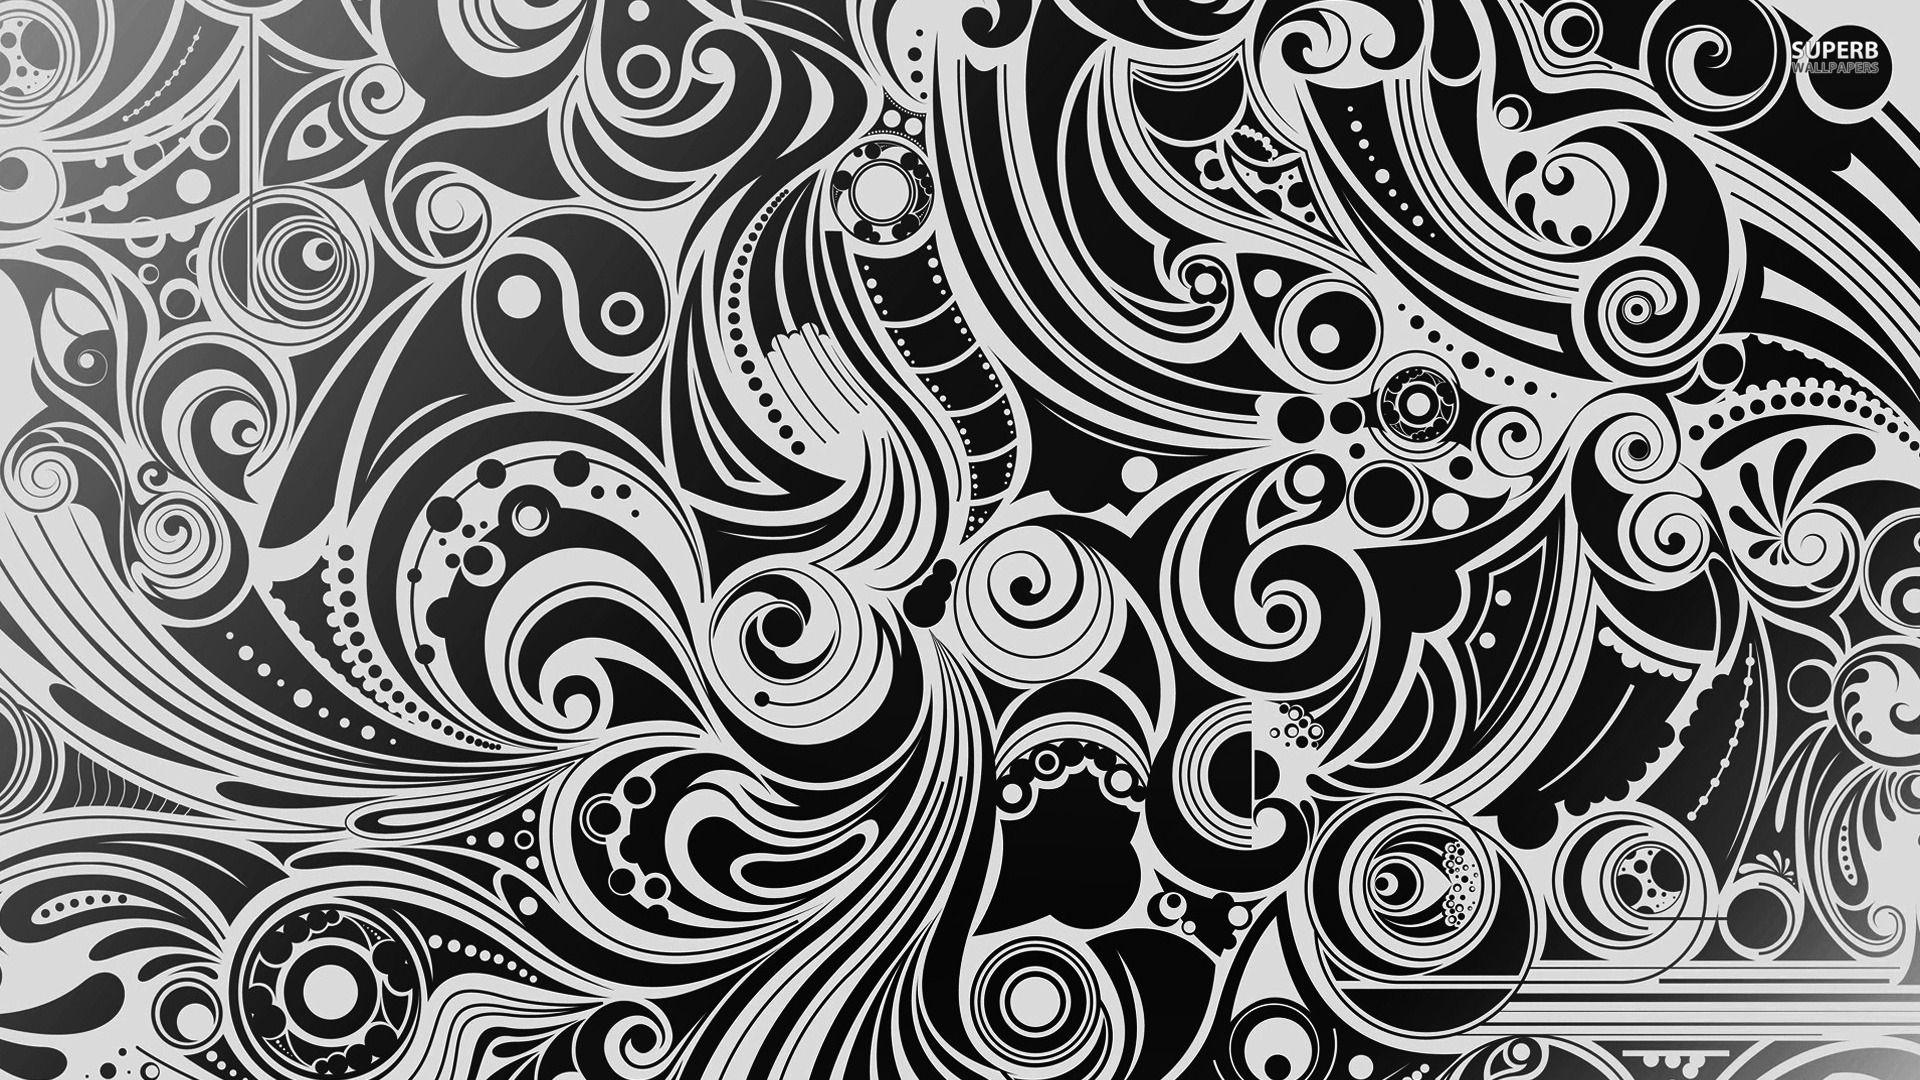 Abstract Art Black And Whit HD Wallpaper, Background Image